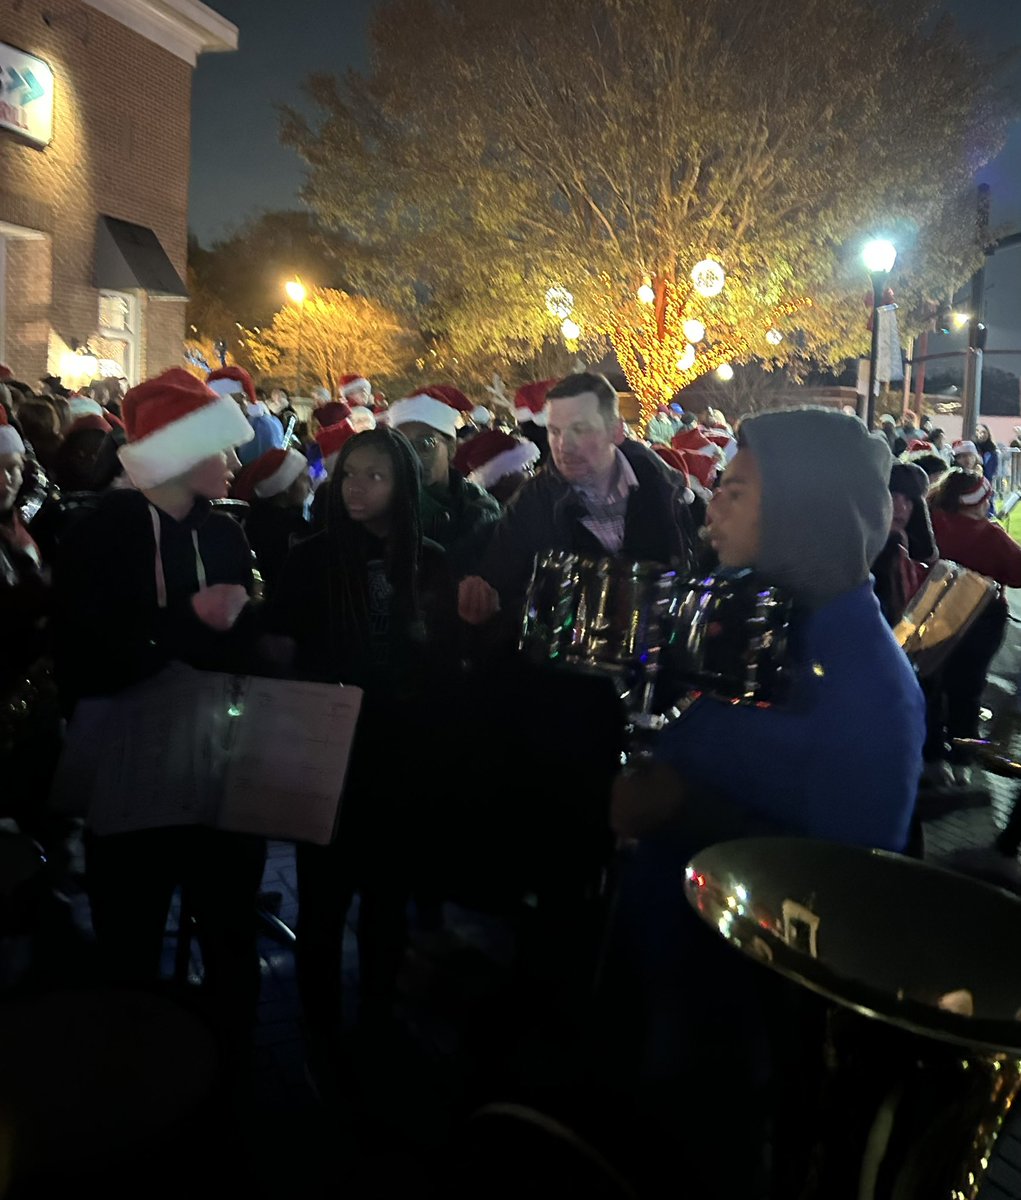 So proud of our Griffin Wildcats as they along with Pearson and Campbell middle, joined the Campbell HS band at the Smyrna Tree lighting. Thank you Ms. Cole and Mr. Rabun for preparing our students to play.